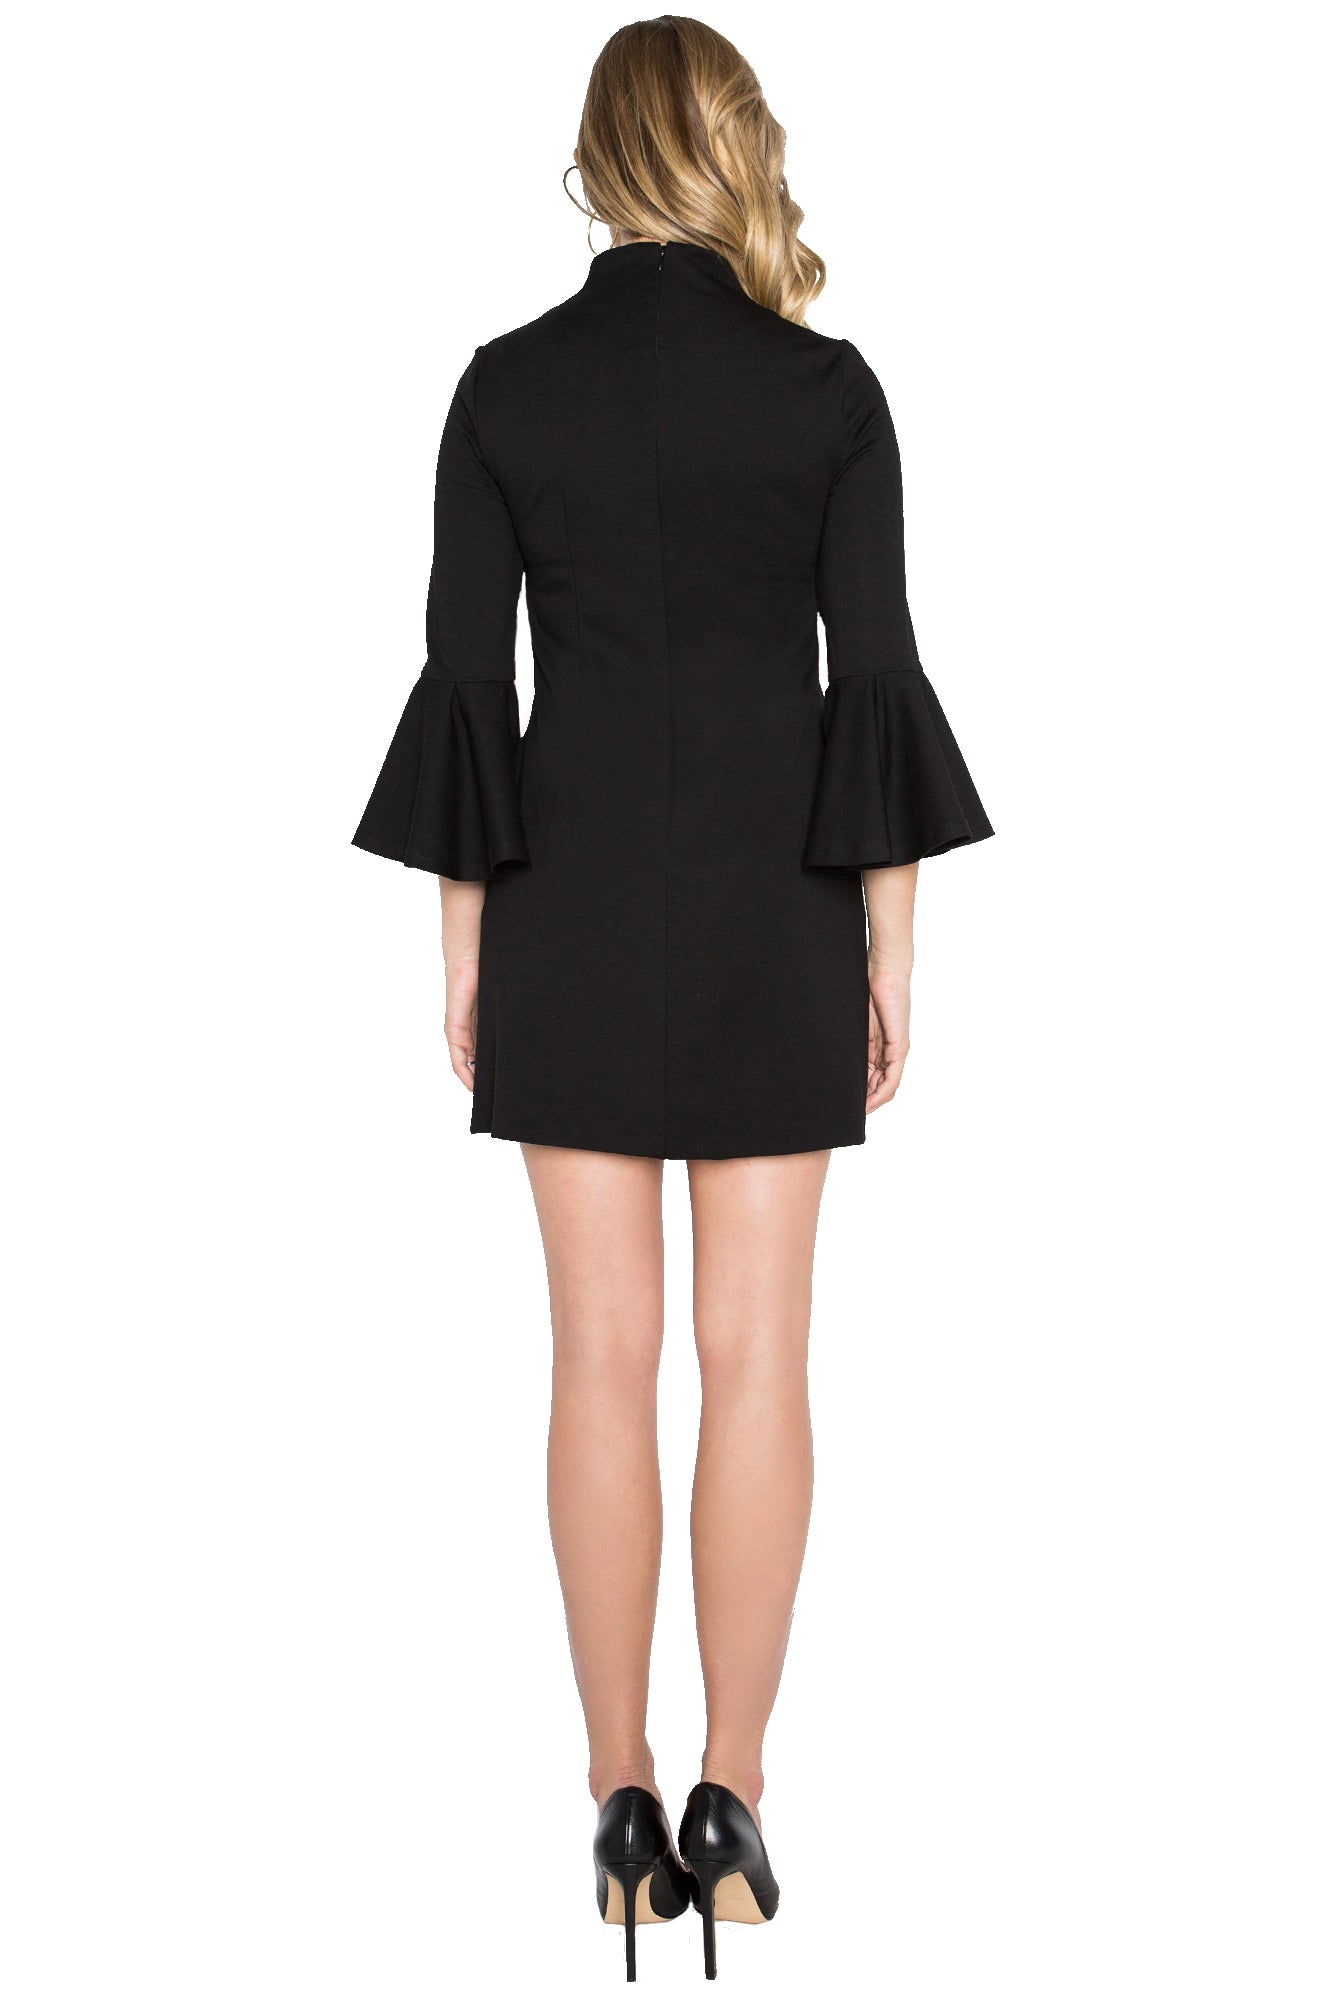 Back view of model wearing black knit Ponte mini shift dress with 3/4 bell sleeves and side slit pockets.